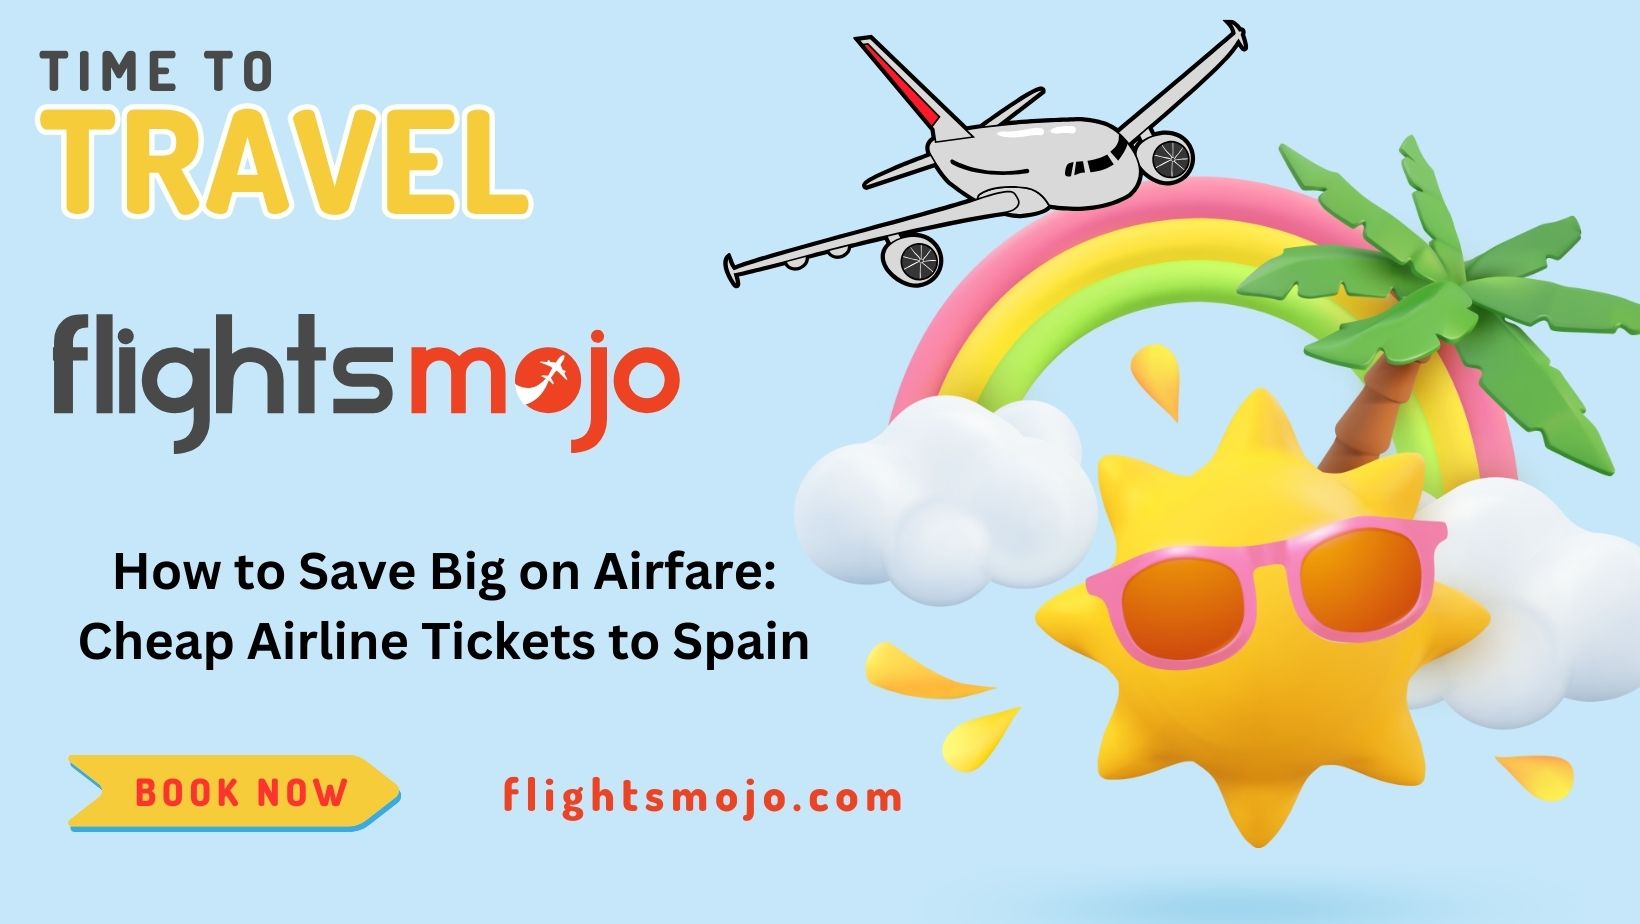 How to Save Big on Airfare: Cheap Airline Tickets to Spain